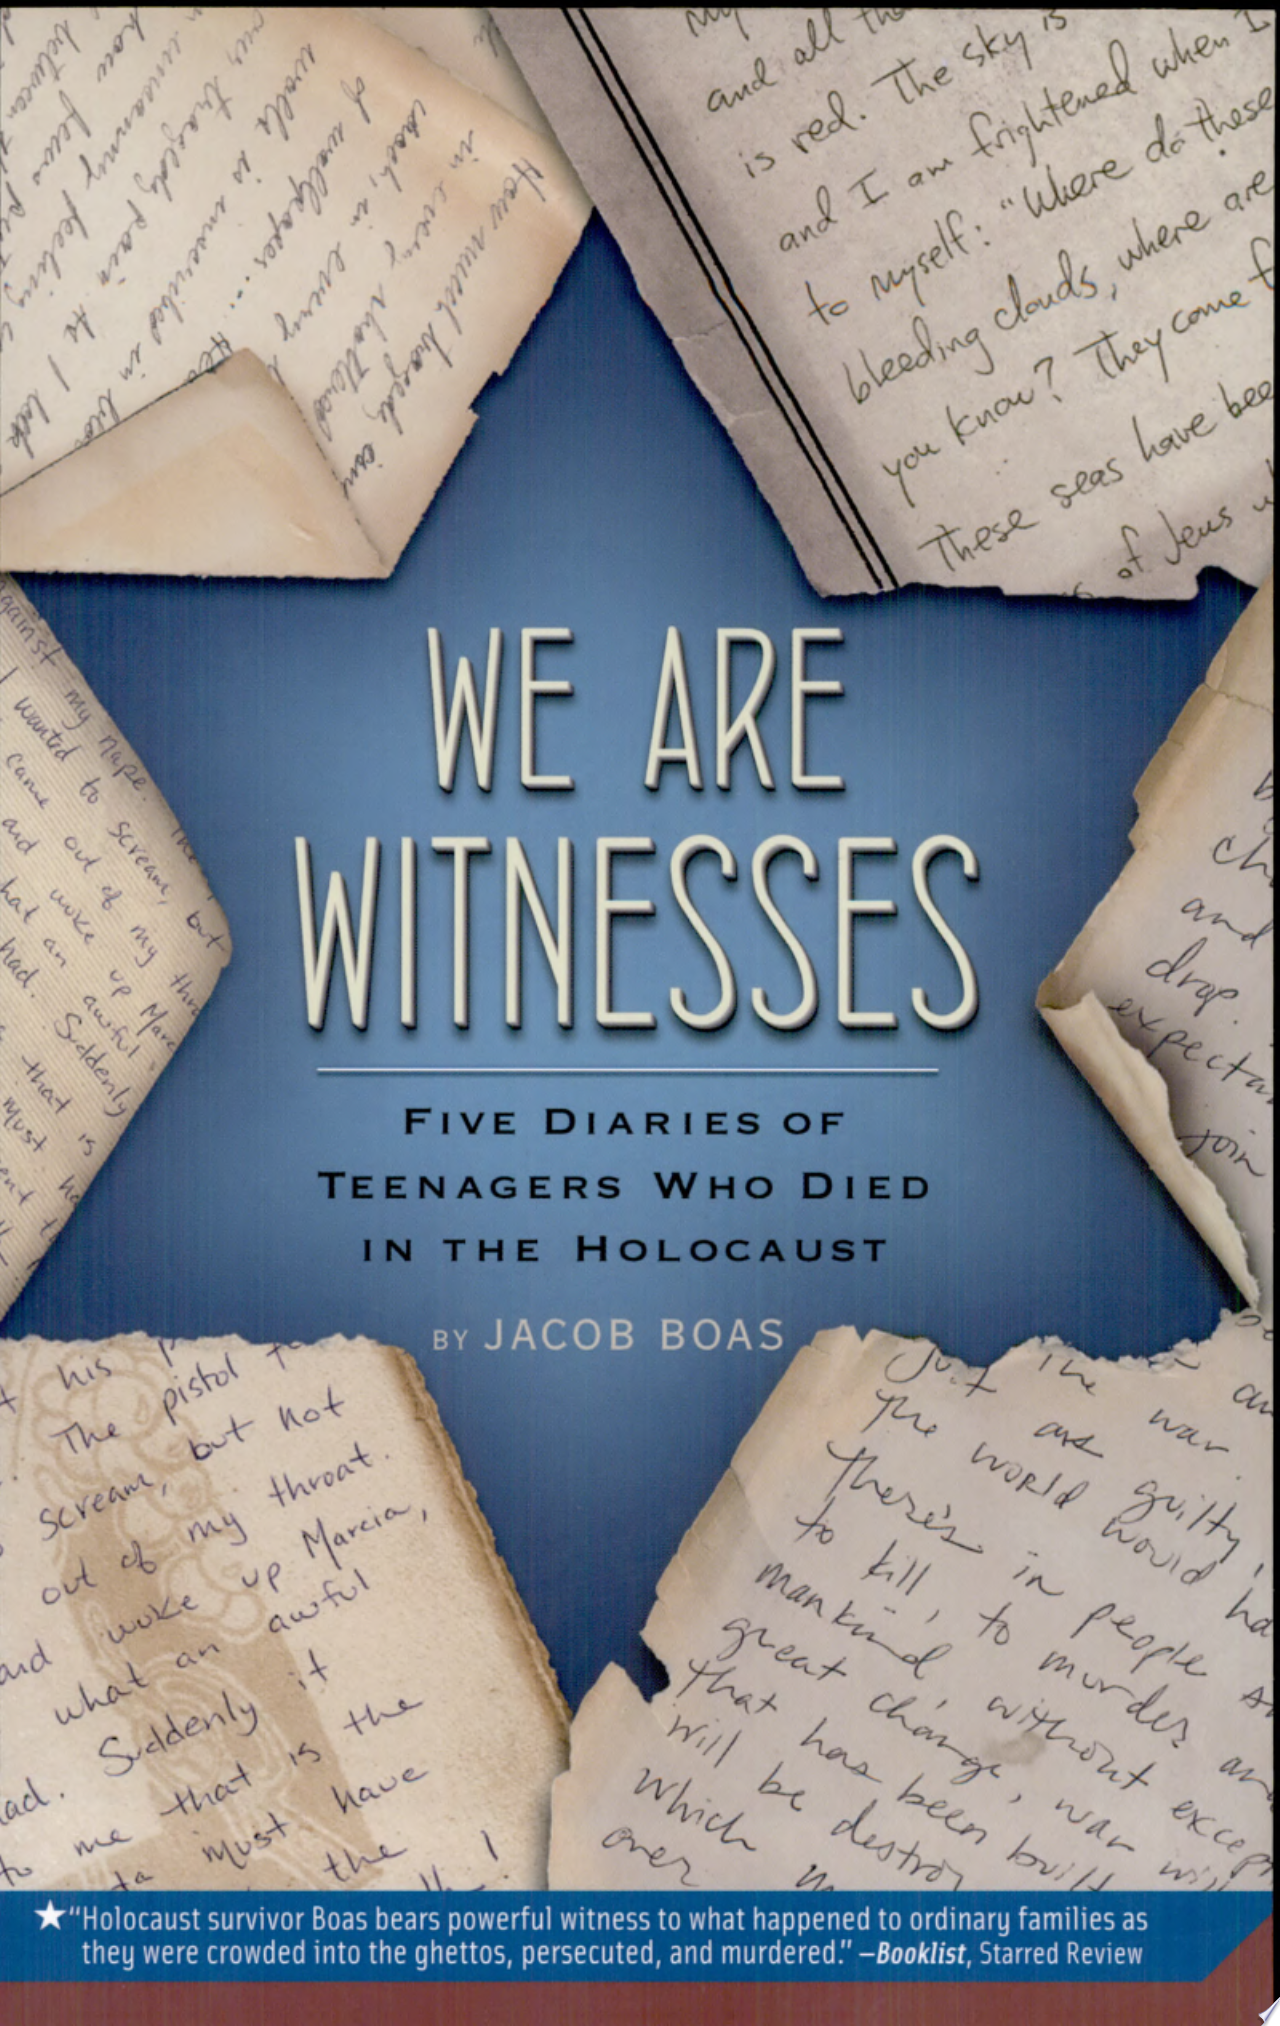 Image for "We Are Witnesses"